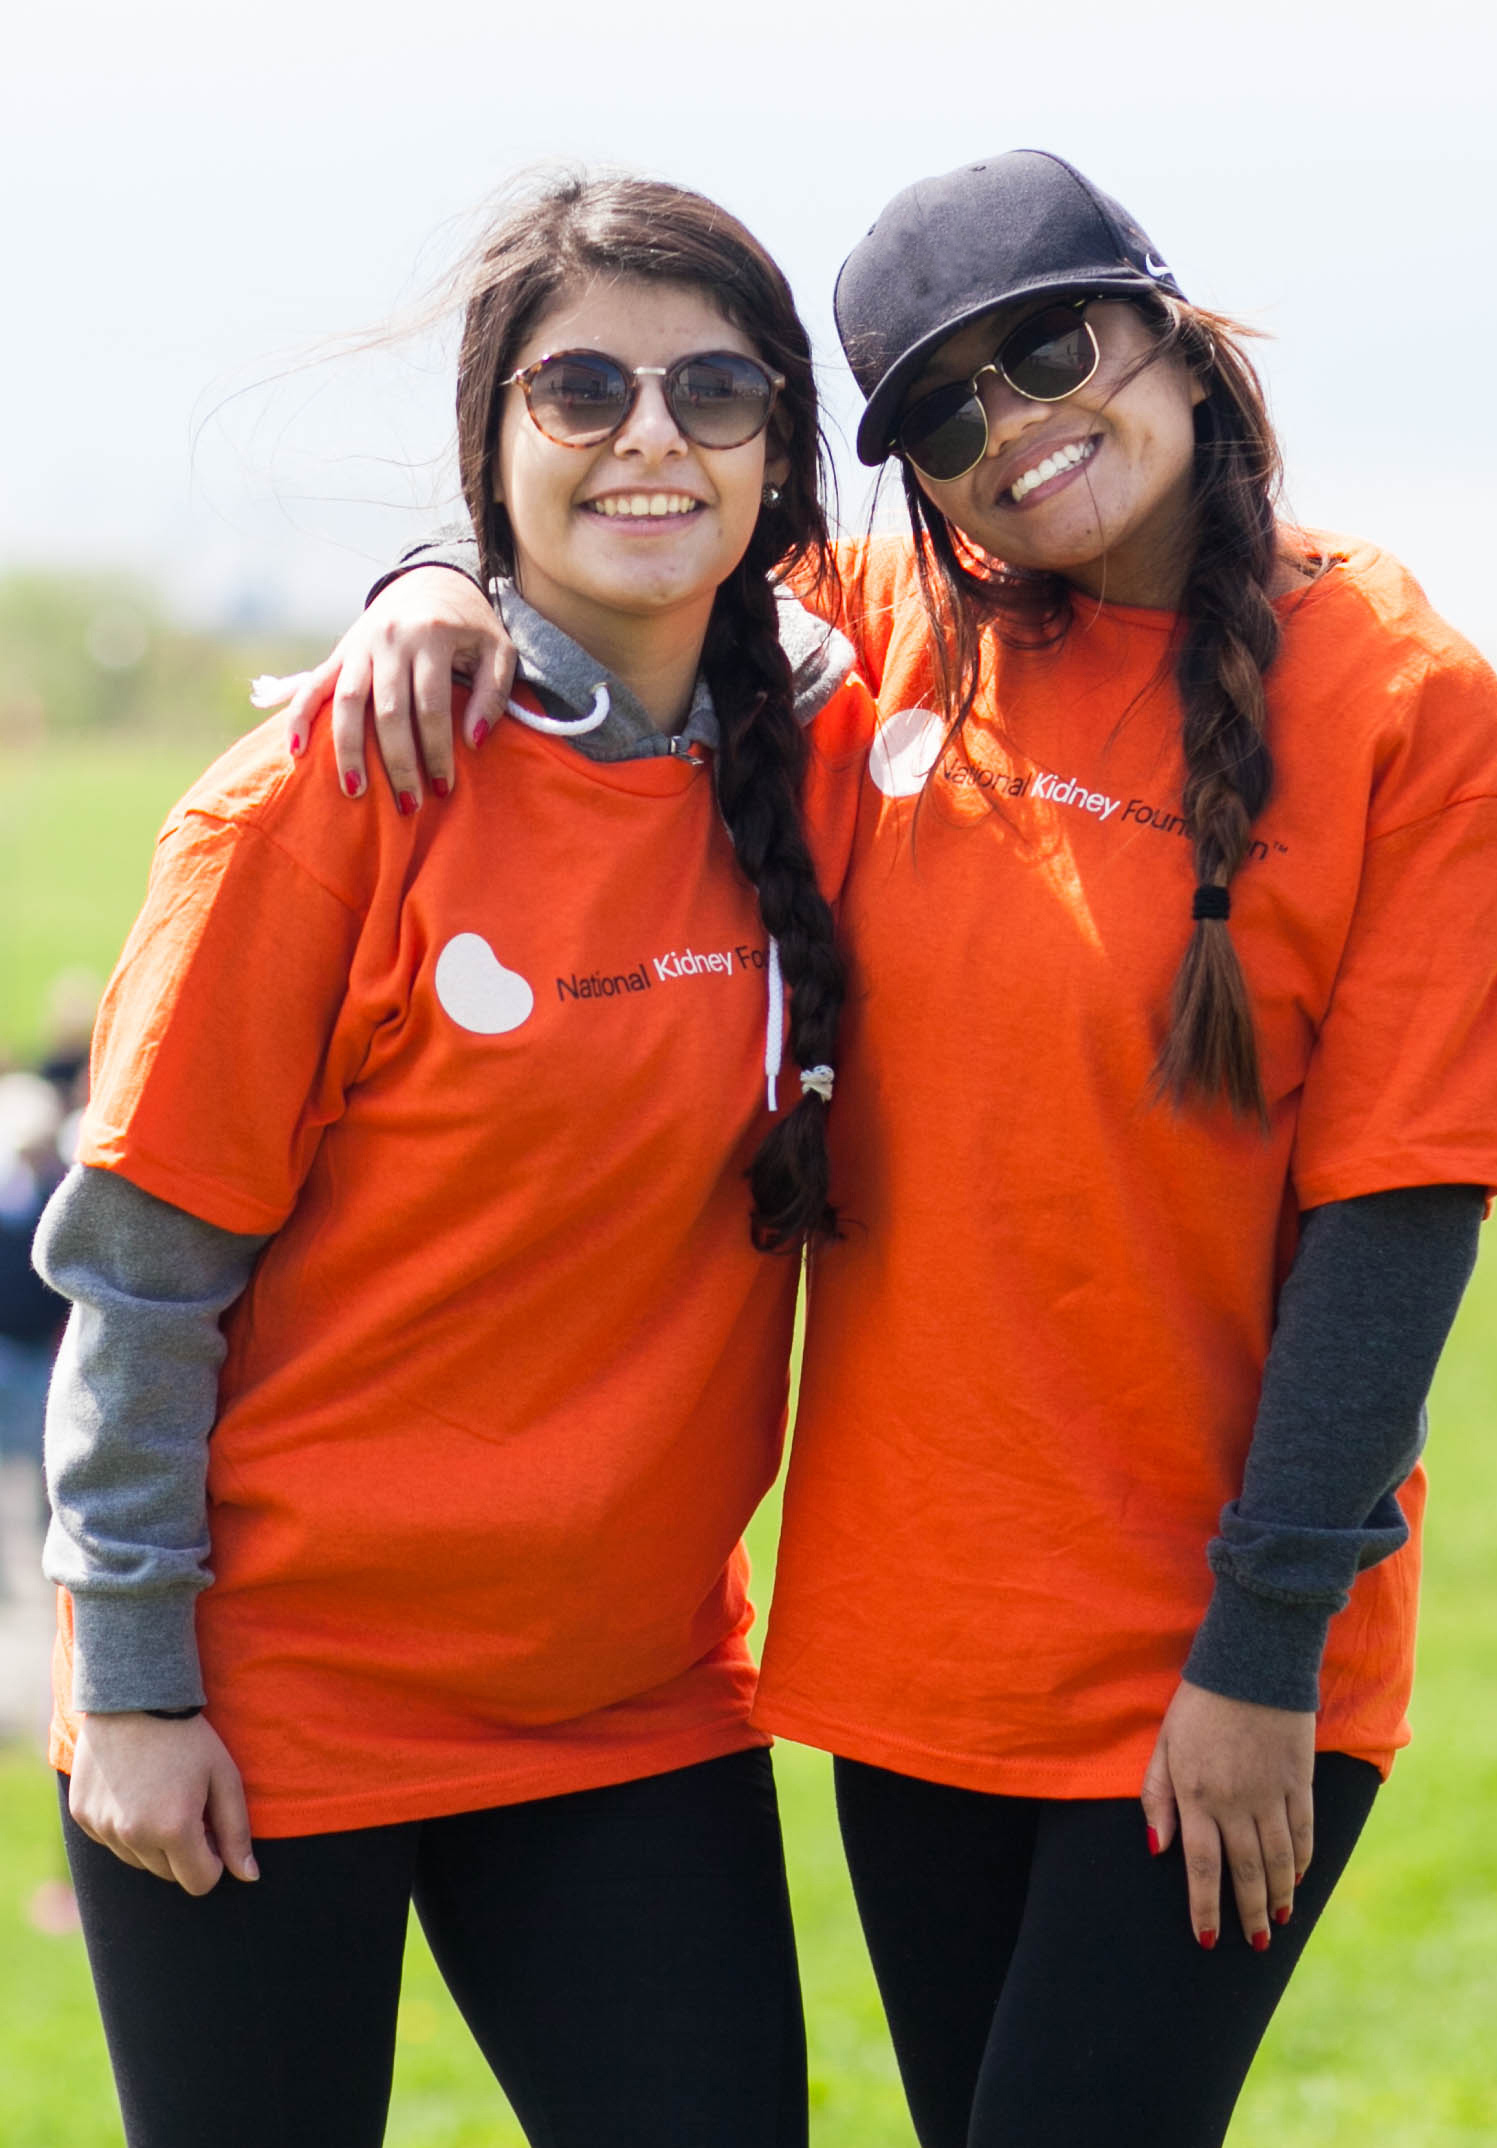  Two ladies at a kidney walk